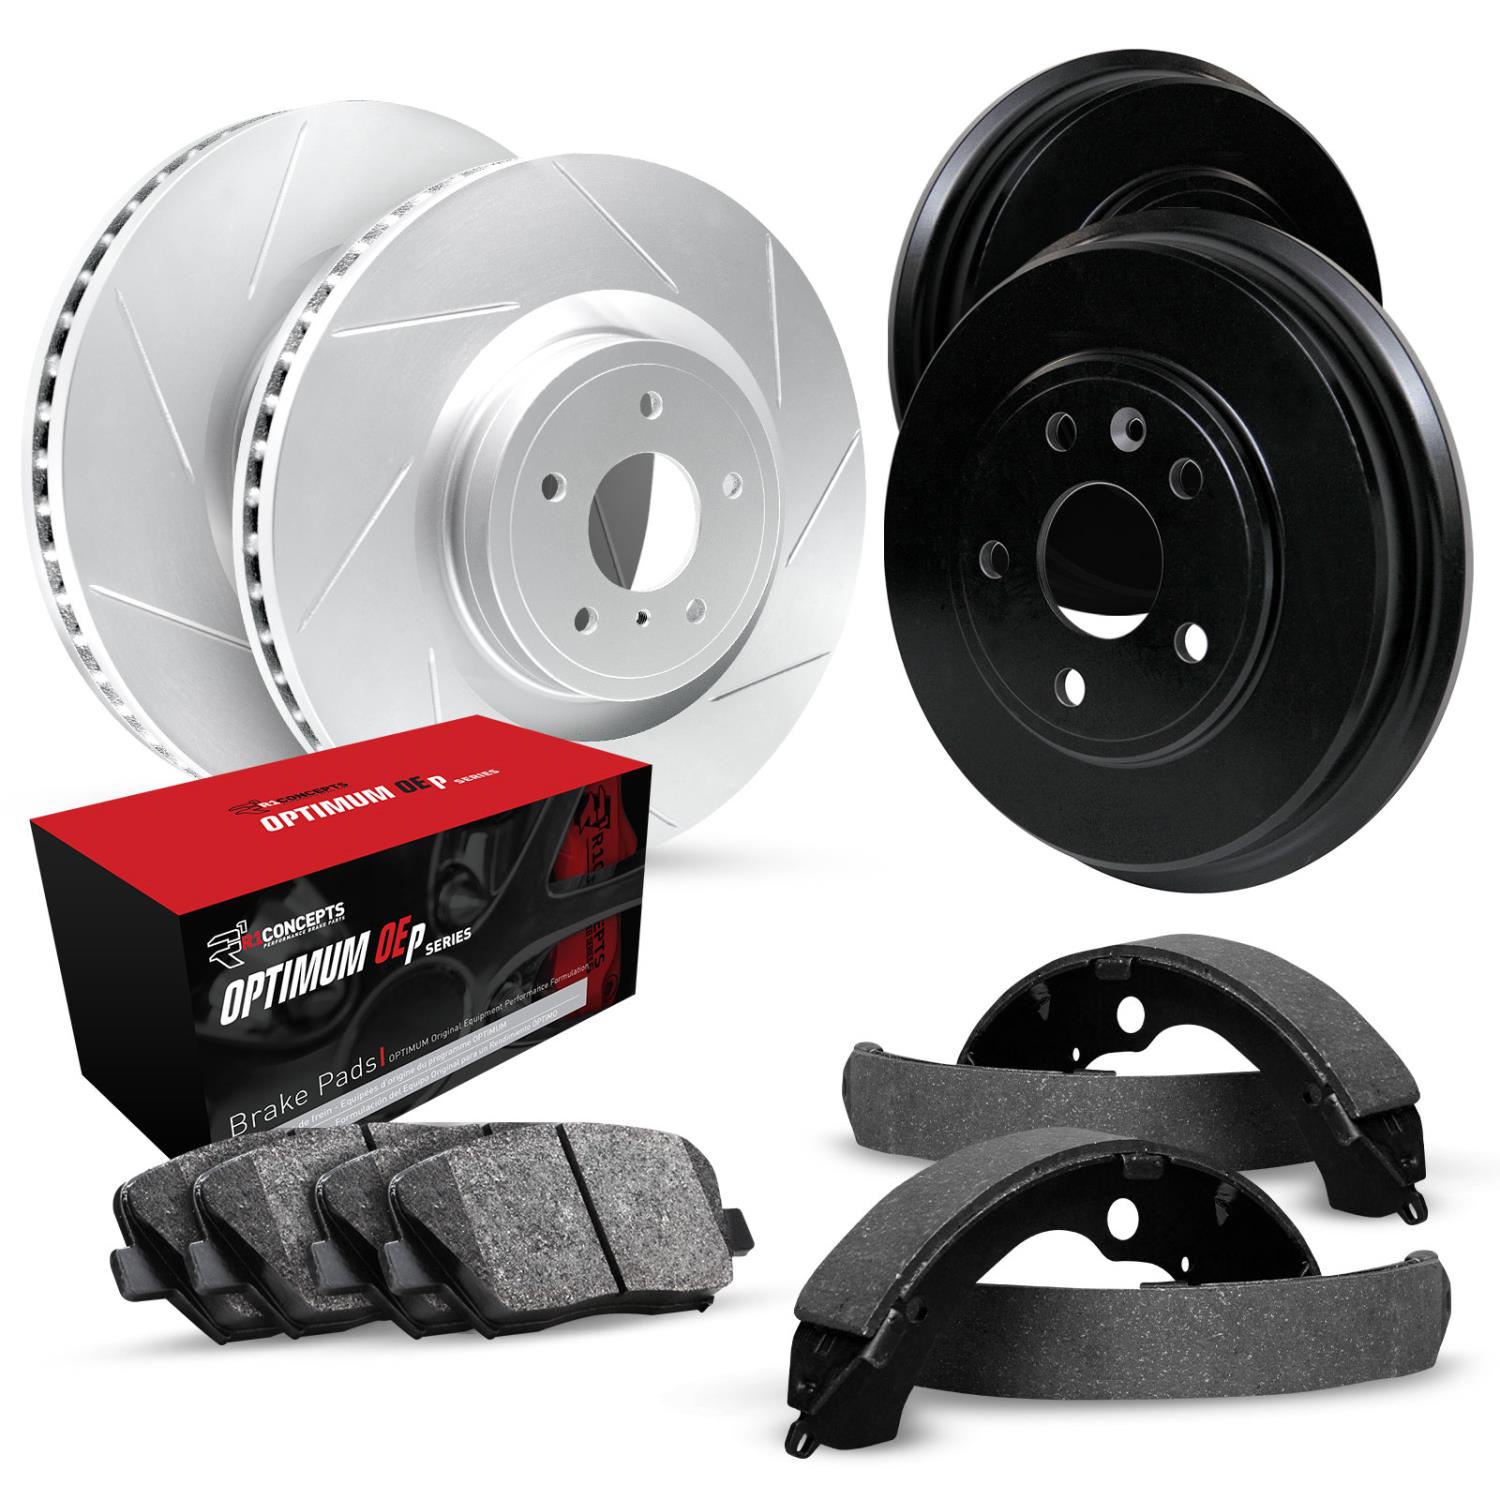 GEO-Carbon Slotted Brake Rotor & Drum Set w/Optimum OE Pads & Shoes, 1979-1980 GM, Position: Front & Rear